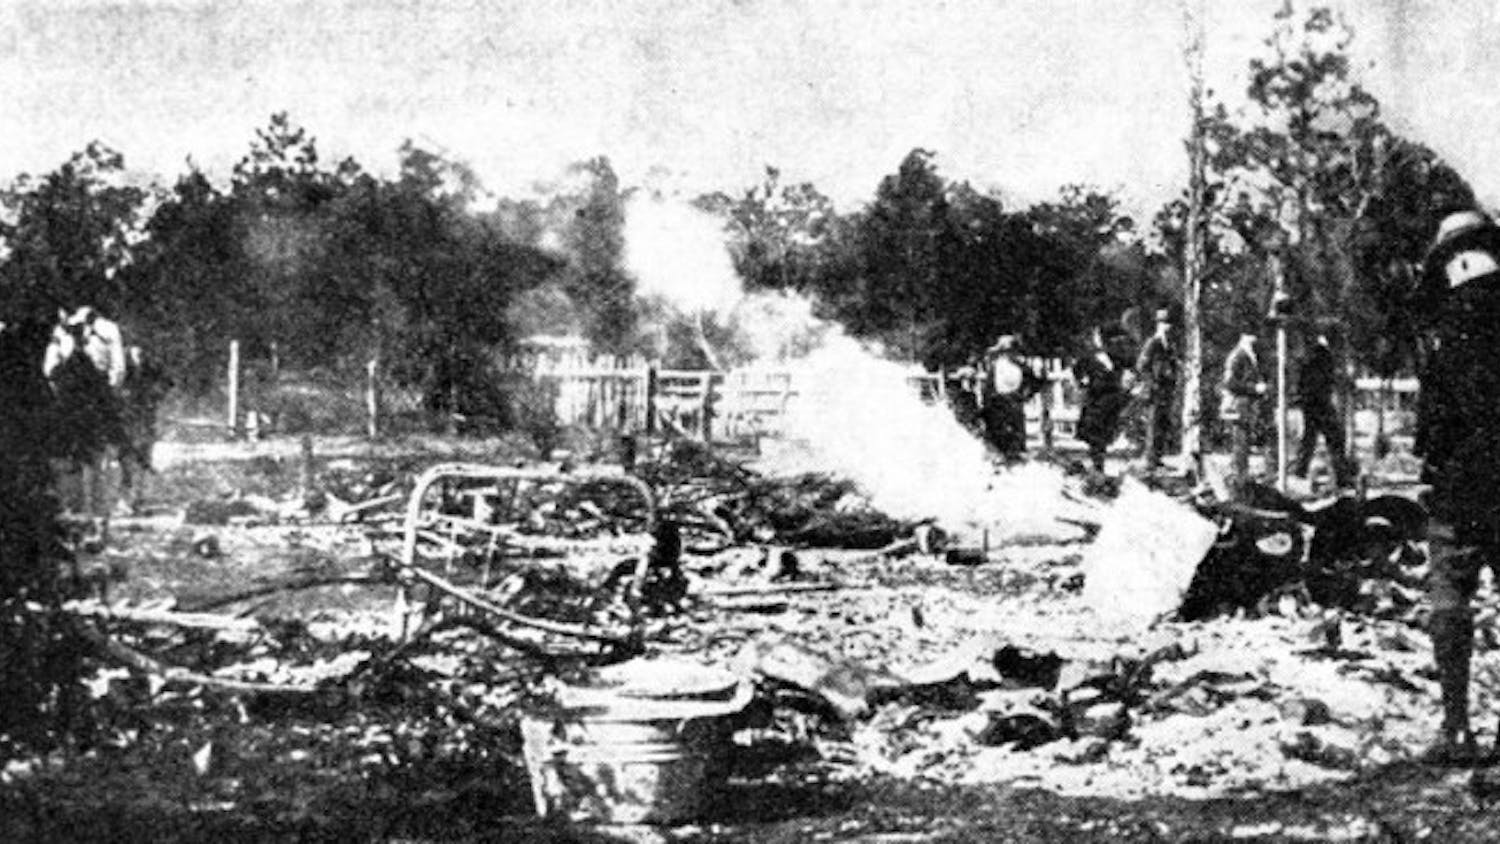 The ruins of a home destroyed during the Rosewood attack, avenging the alleged murder of Fannie Taylor.